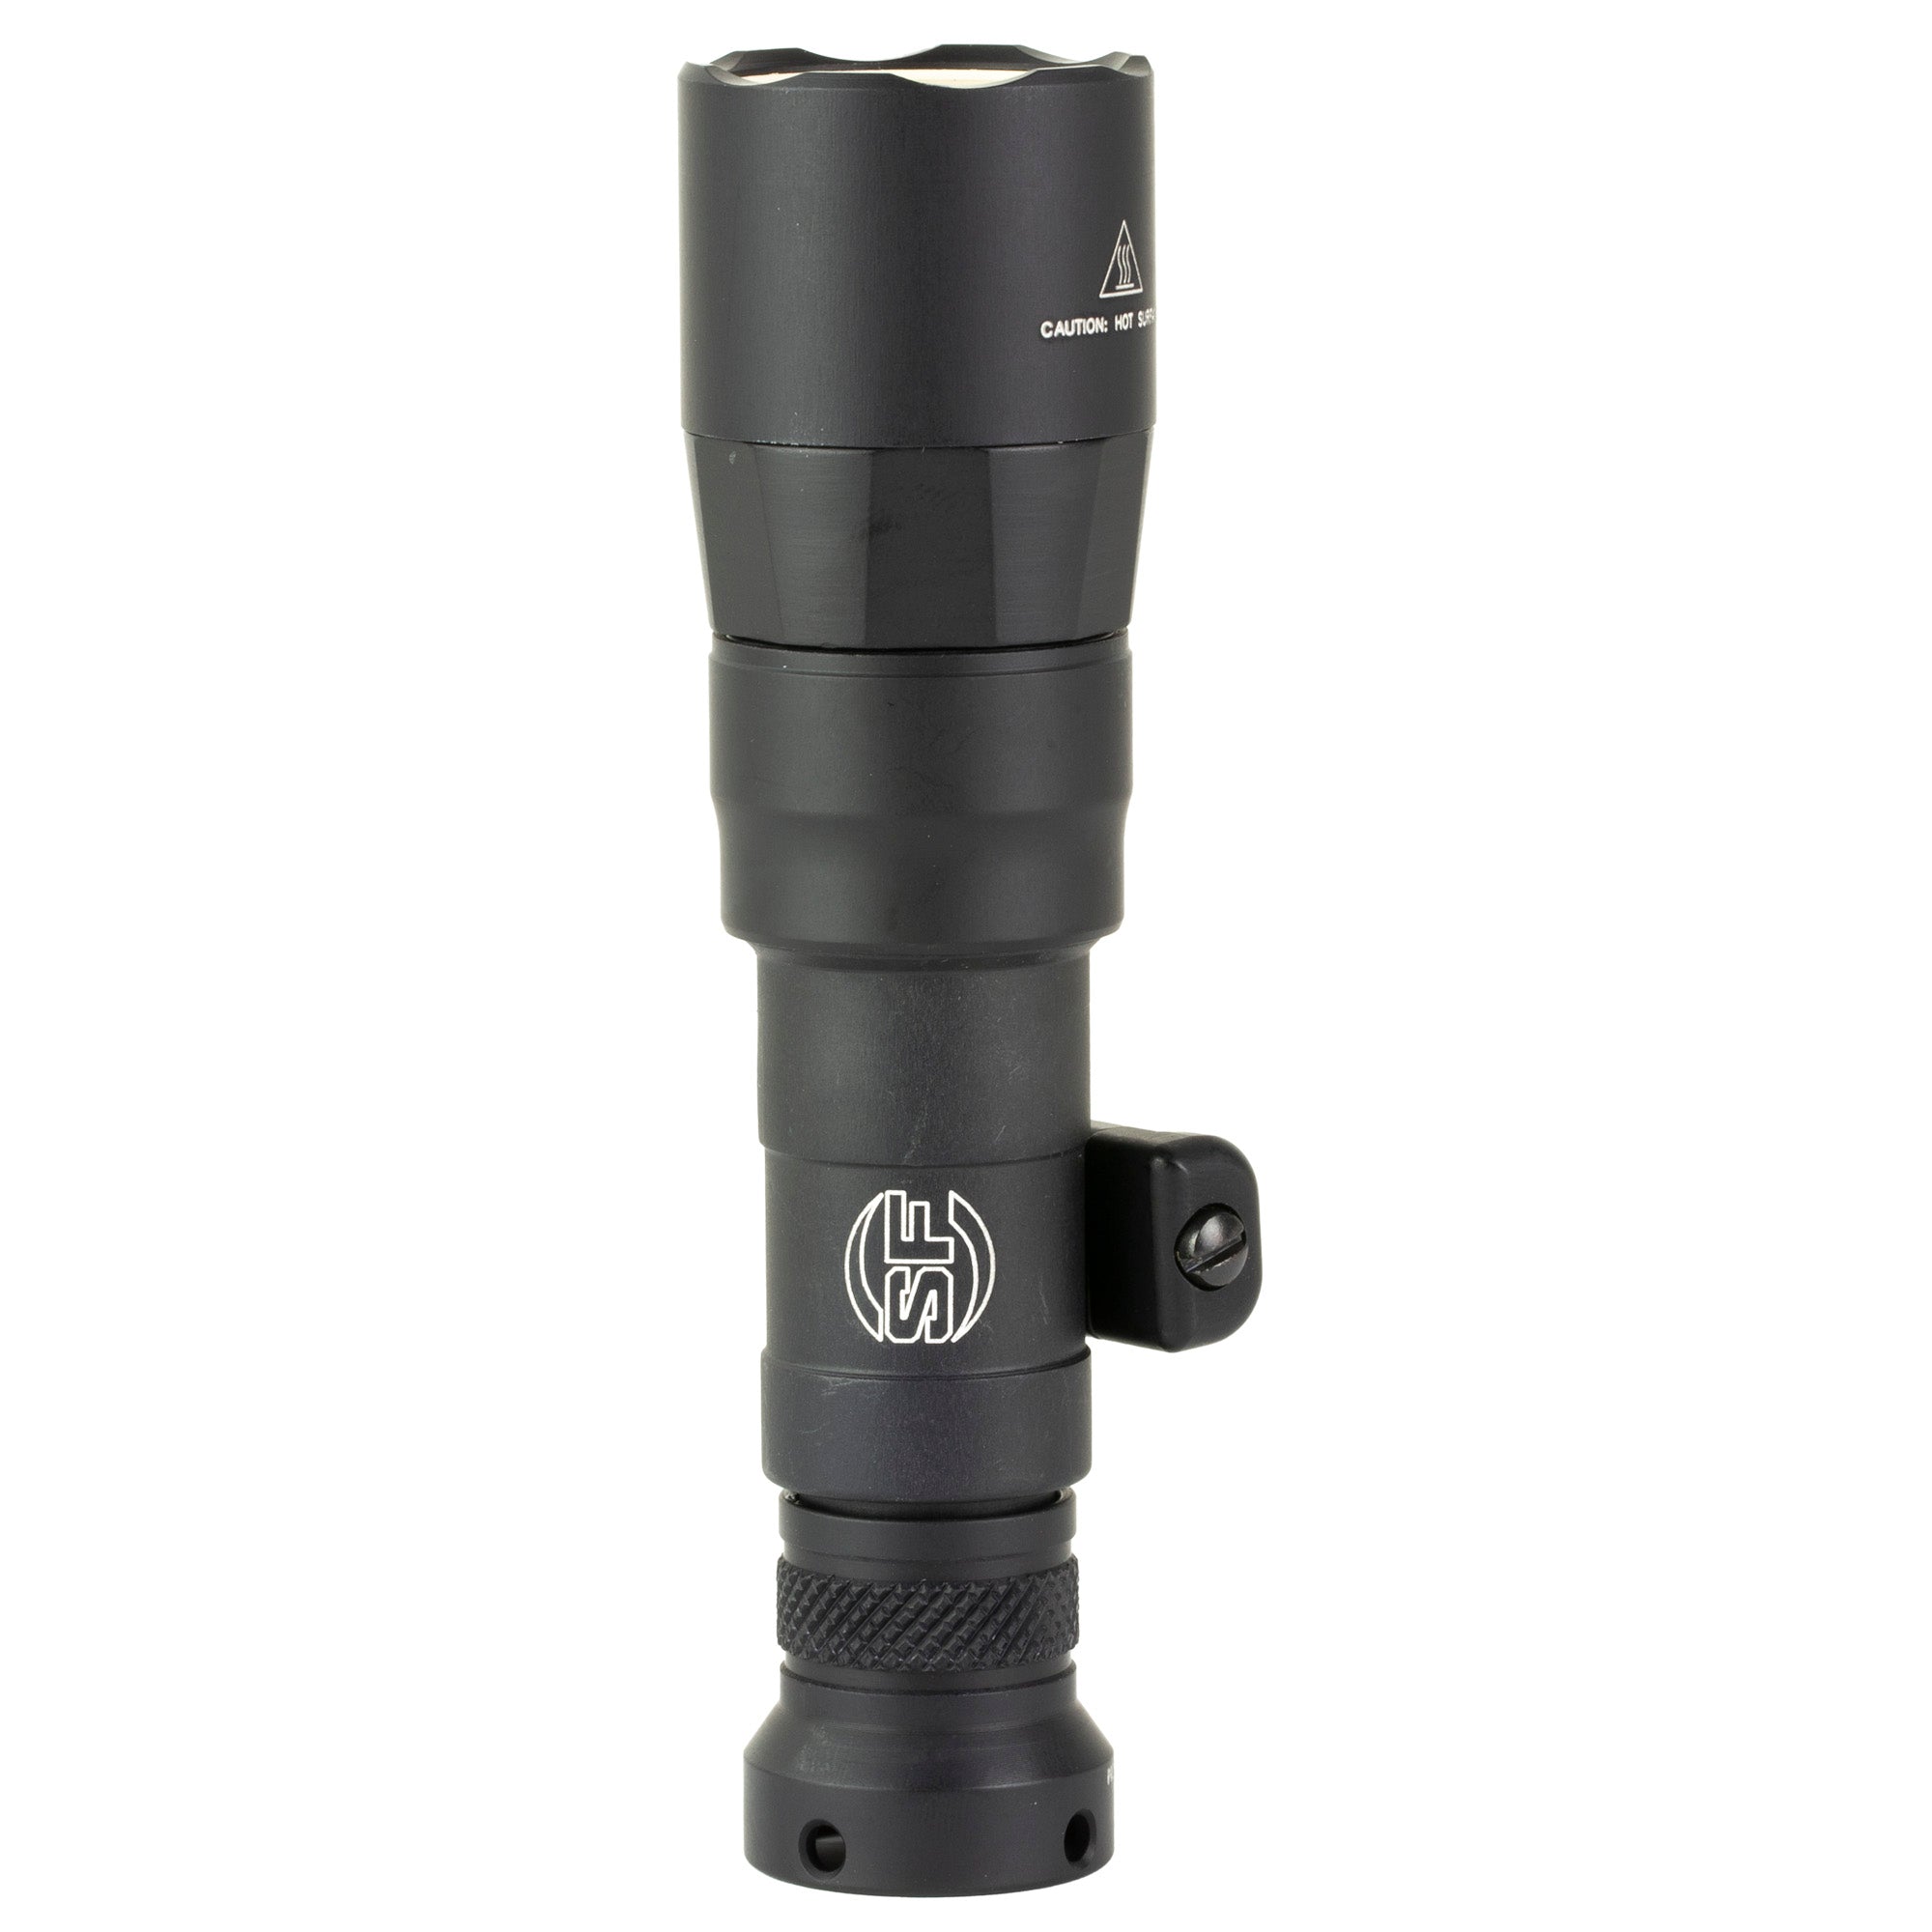 Surefire M340C Turbo Scout Light Pro Flashlight in black, equipped with dual fuel technology, 500 lumens, and includes a Z68 On/Off Tailcap and MLOK adapter, mounted on a firearm